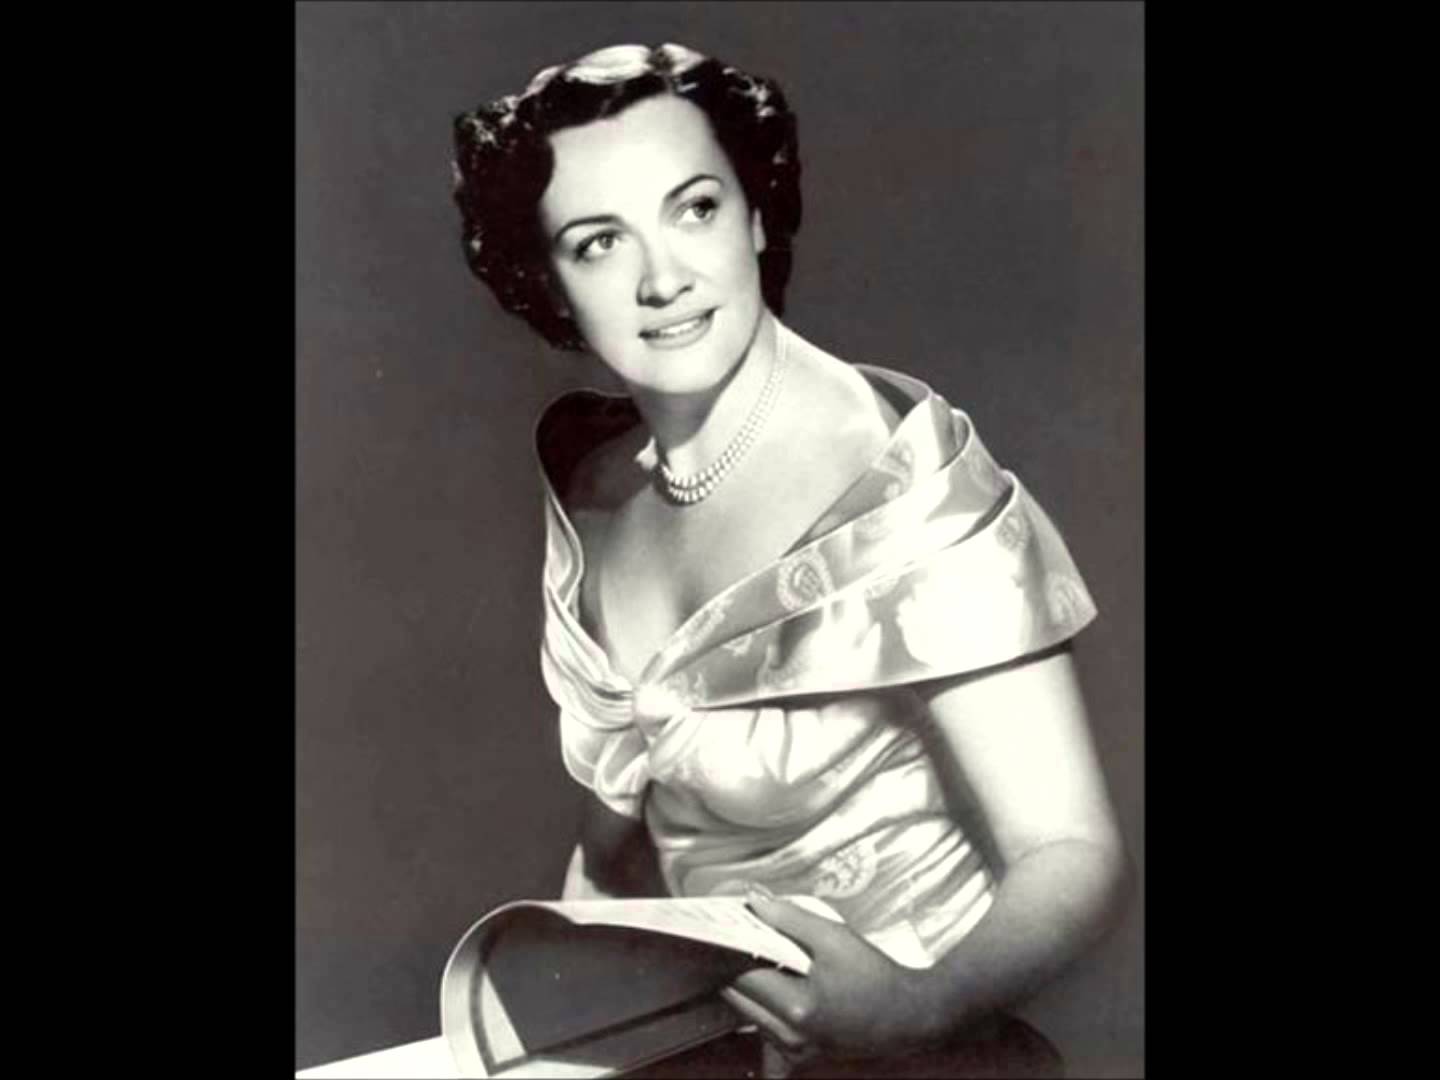 Only one woman in Kathleen Ferrier finals